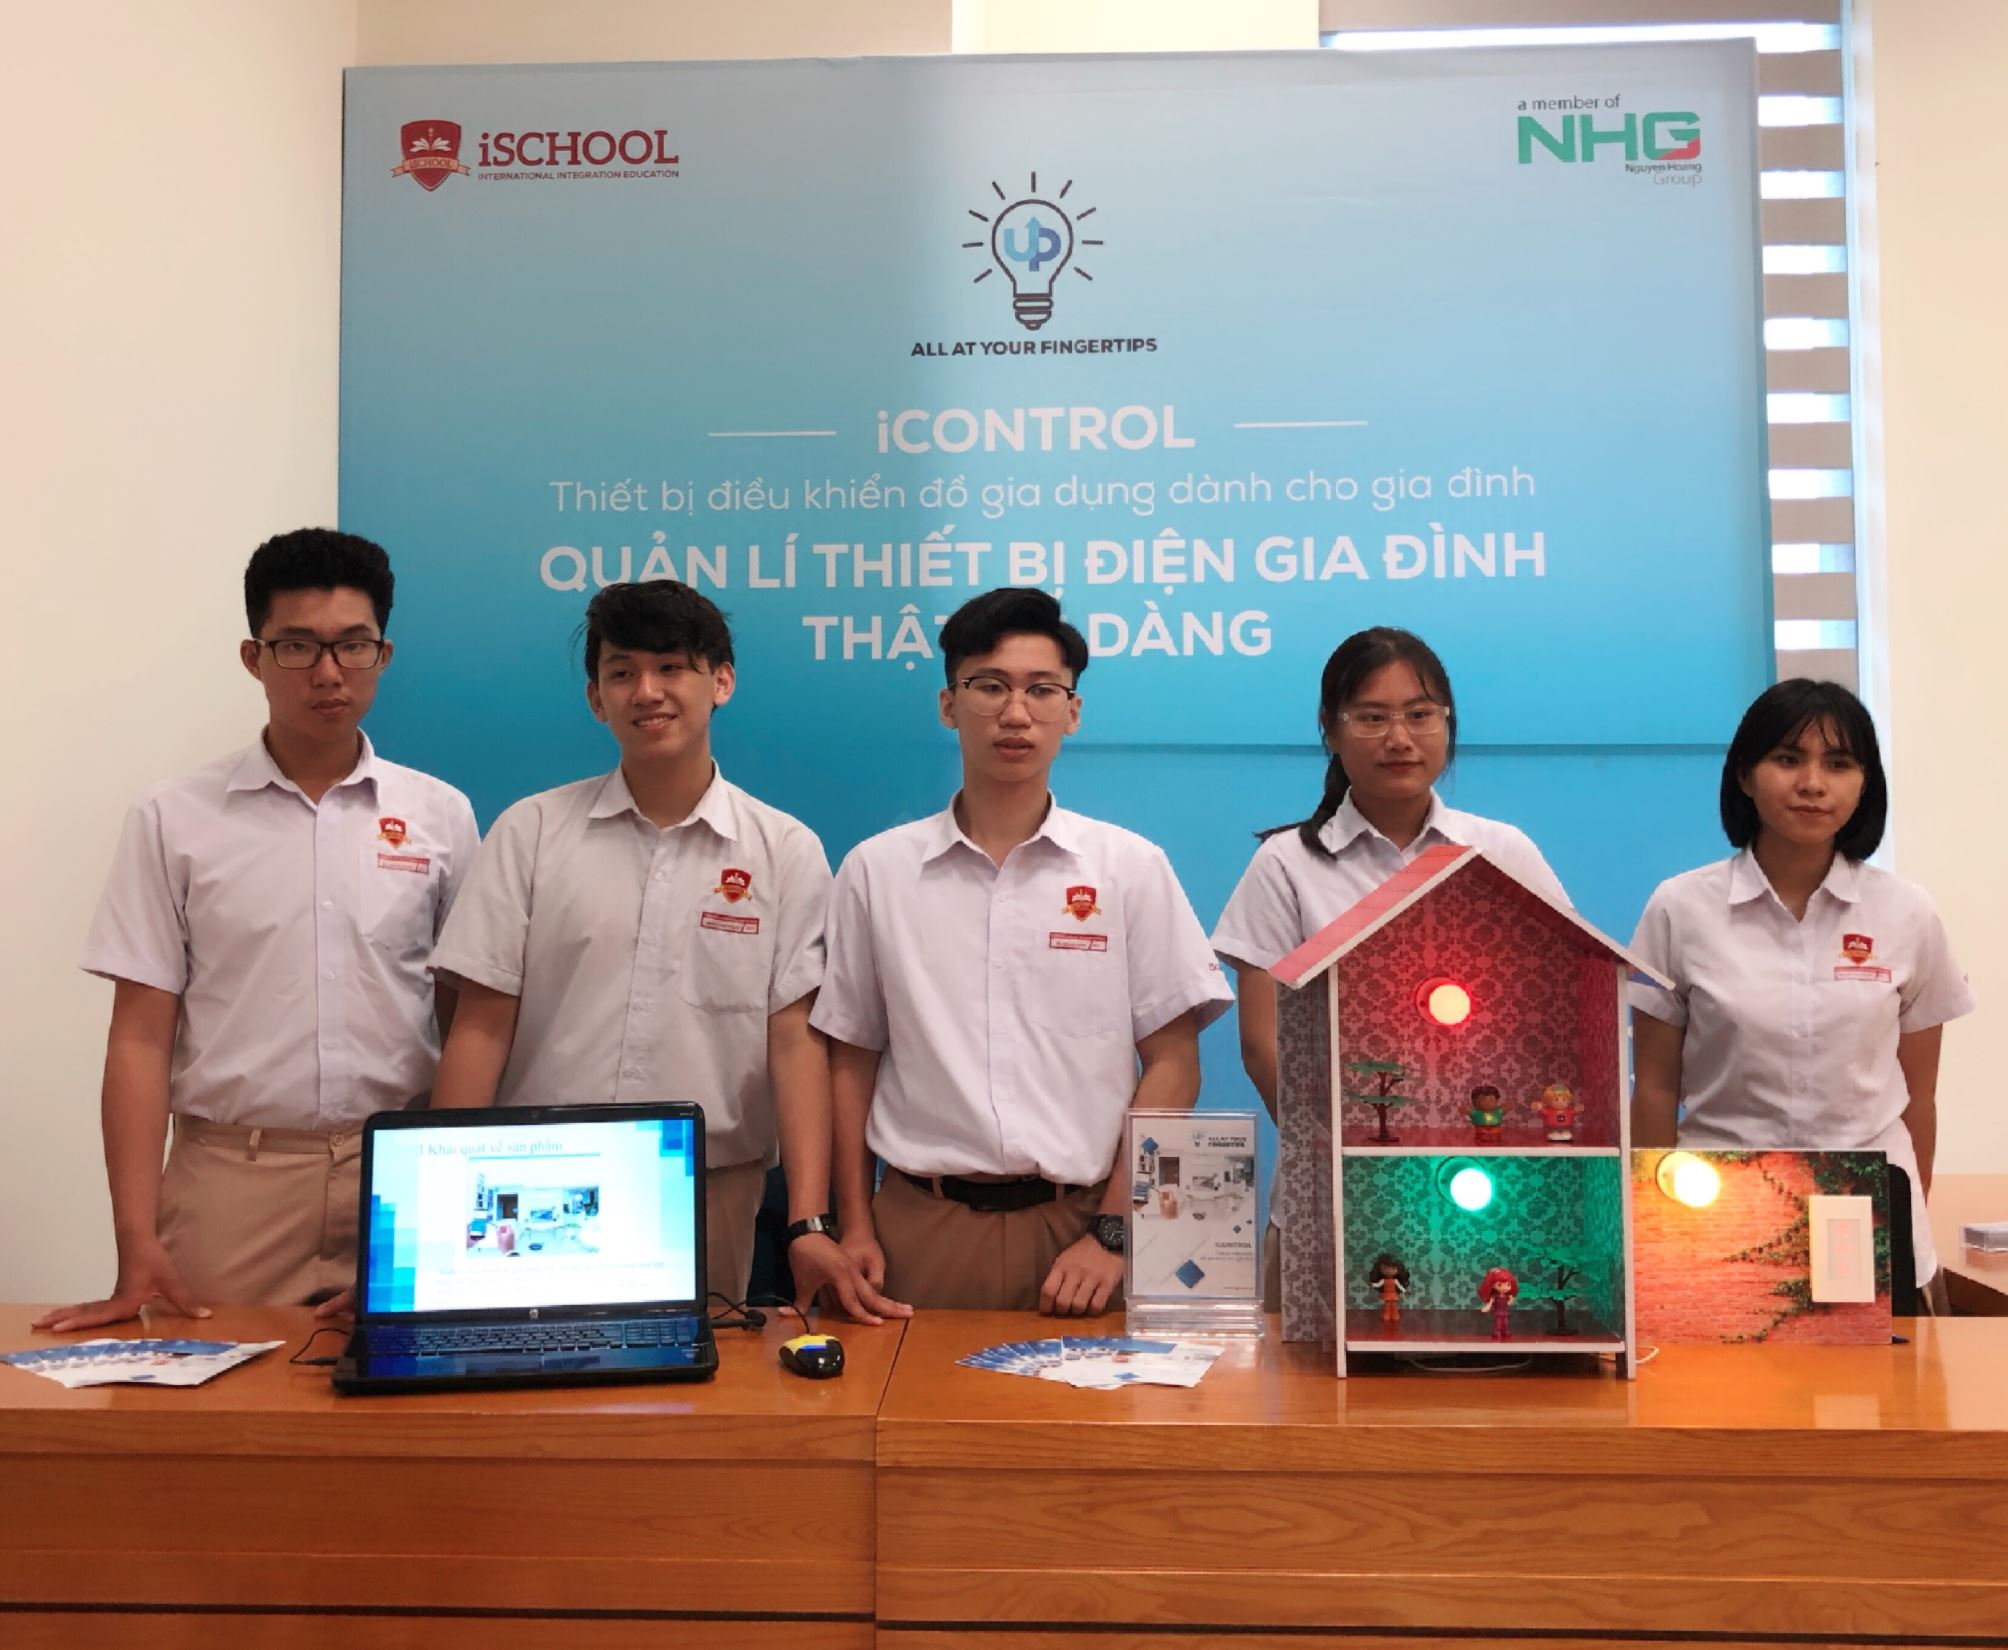 The booth of the electrical equipment control system supporting people with disabilities of iSchool Nha Trang students in the final round of the contest National Start-up 2018 contest